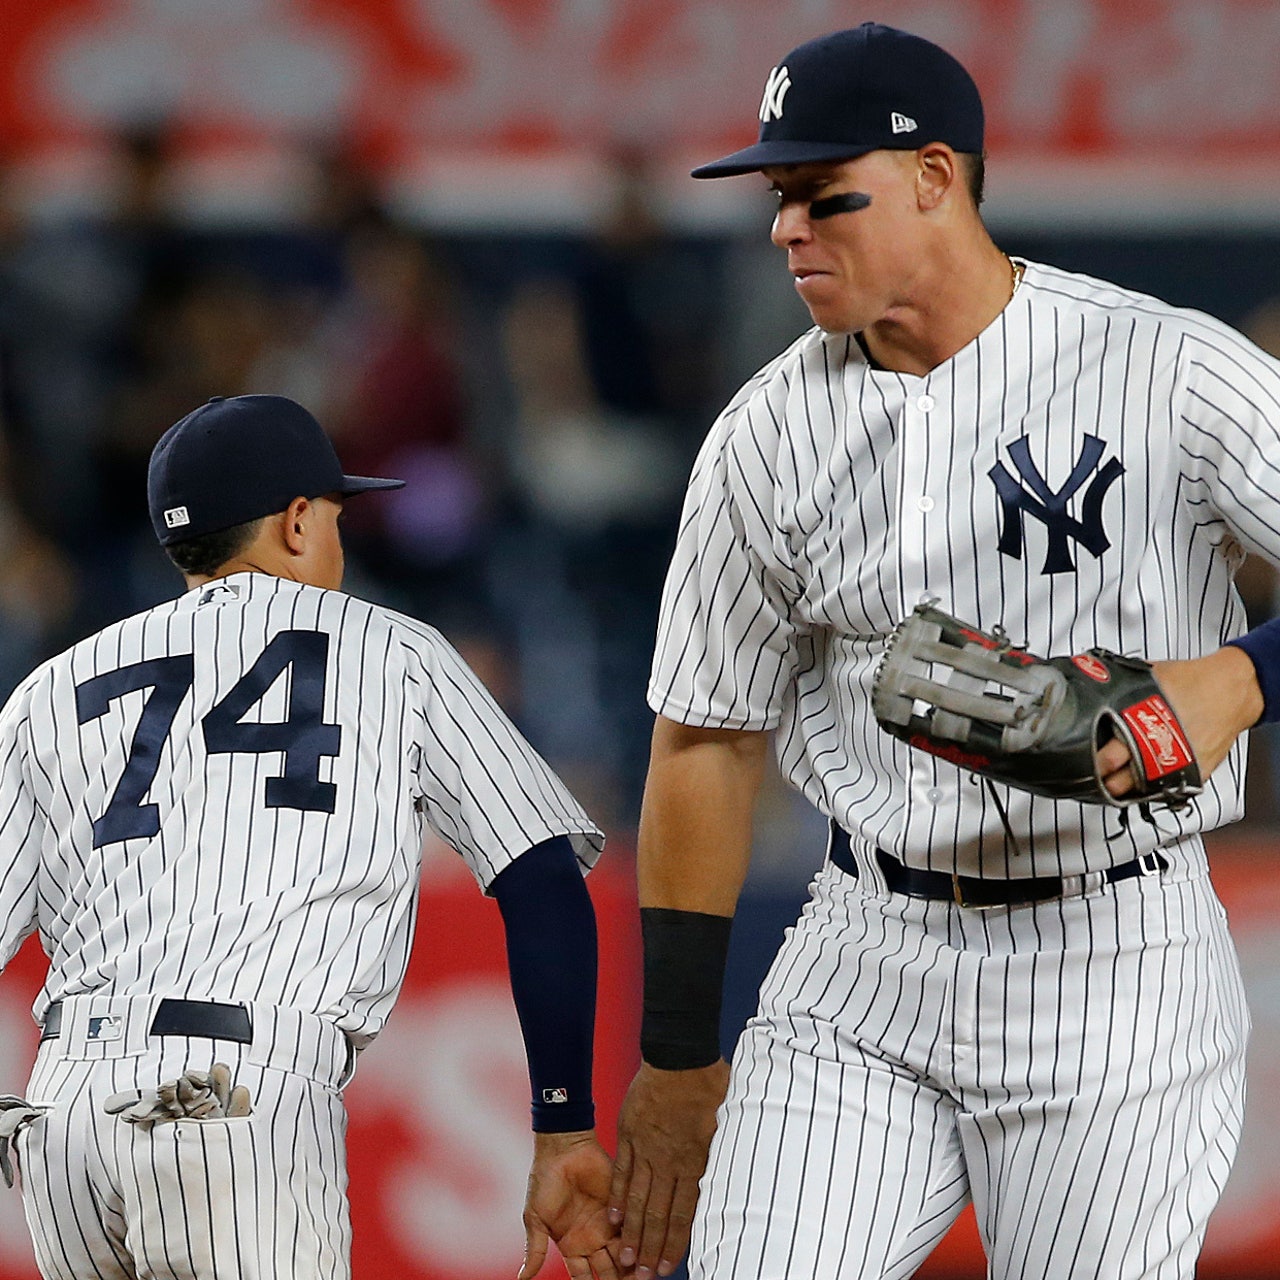 Aaron Judge and Ronald Torreyes swapped jerseys, with predictably